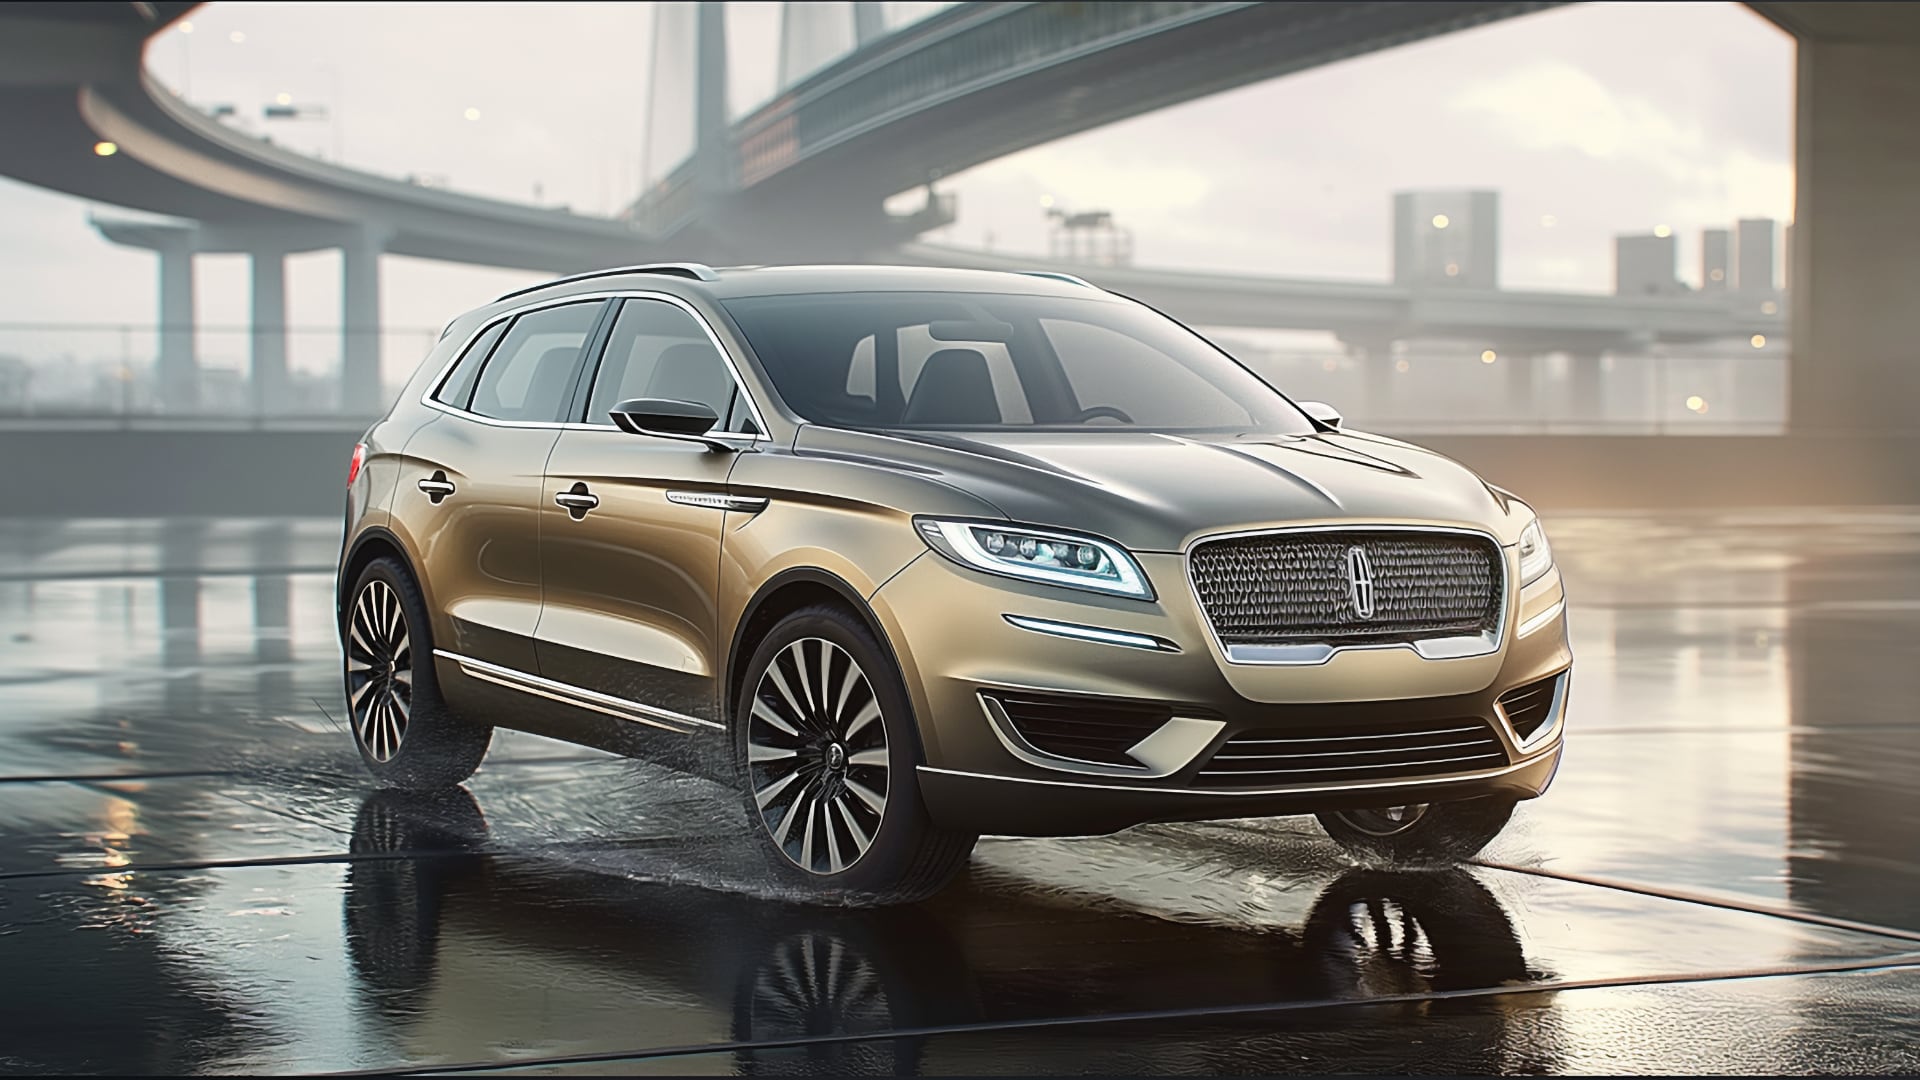 The 2020 Lincoln MKX SUV, a model year to avoid, is parked on a wet road.